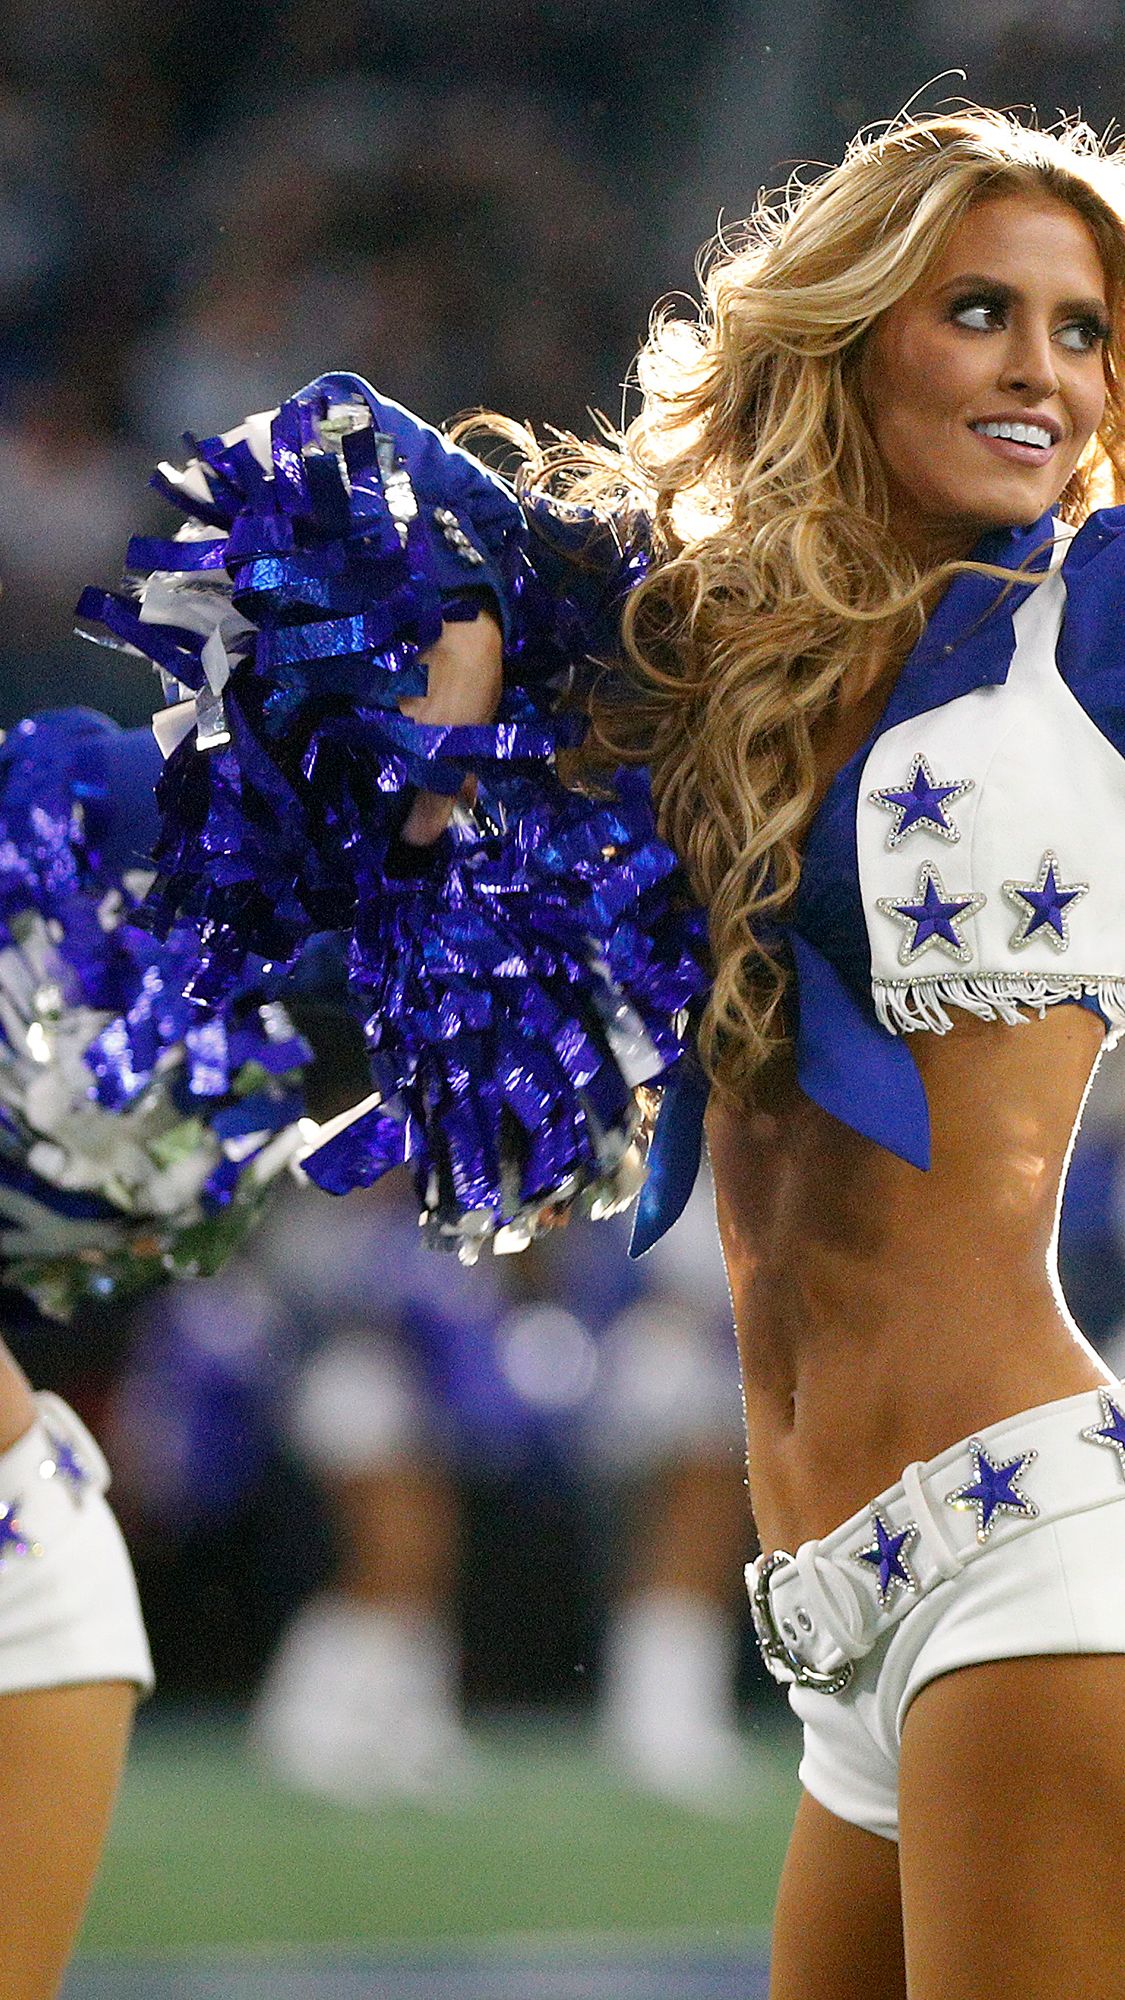 Sexy Cheerleader Daughter Porn - NFL cheer uniforms have been scrutinized since the 1970s, but critics might  be missing the point | CNN